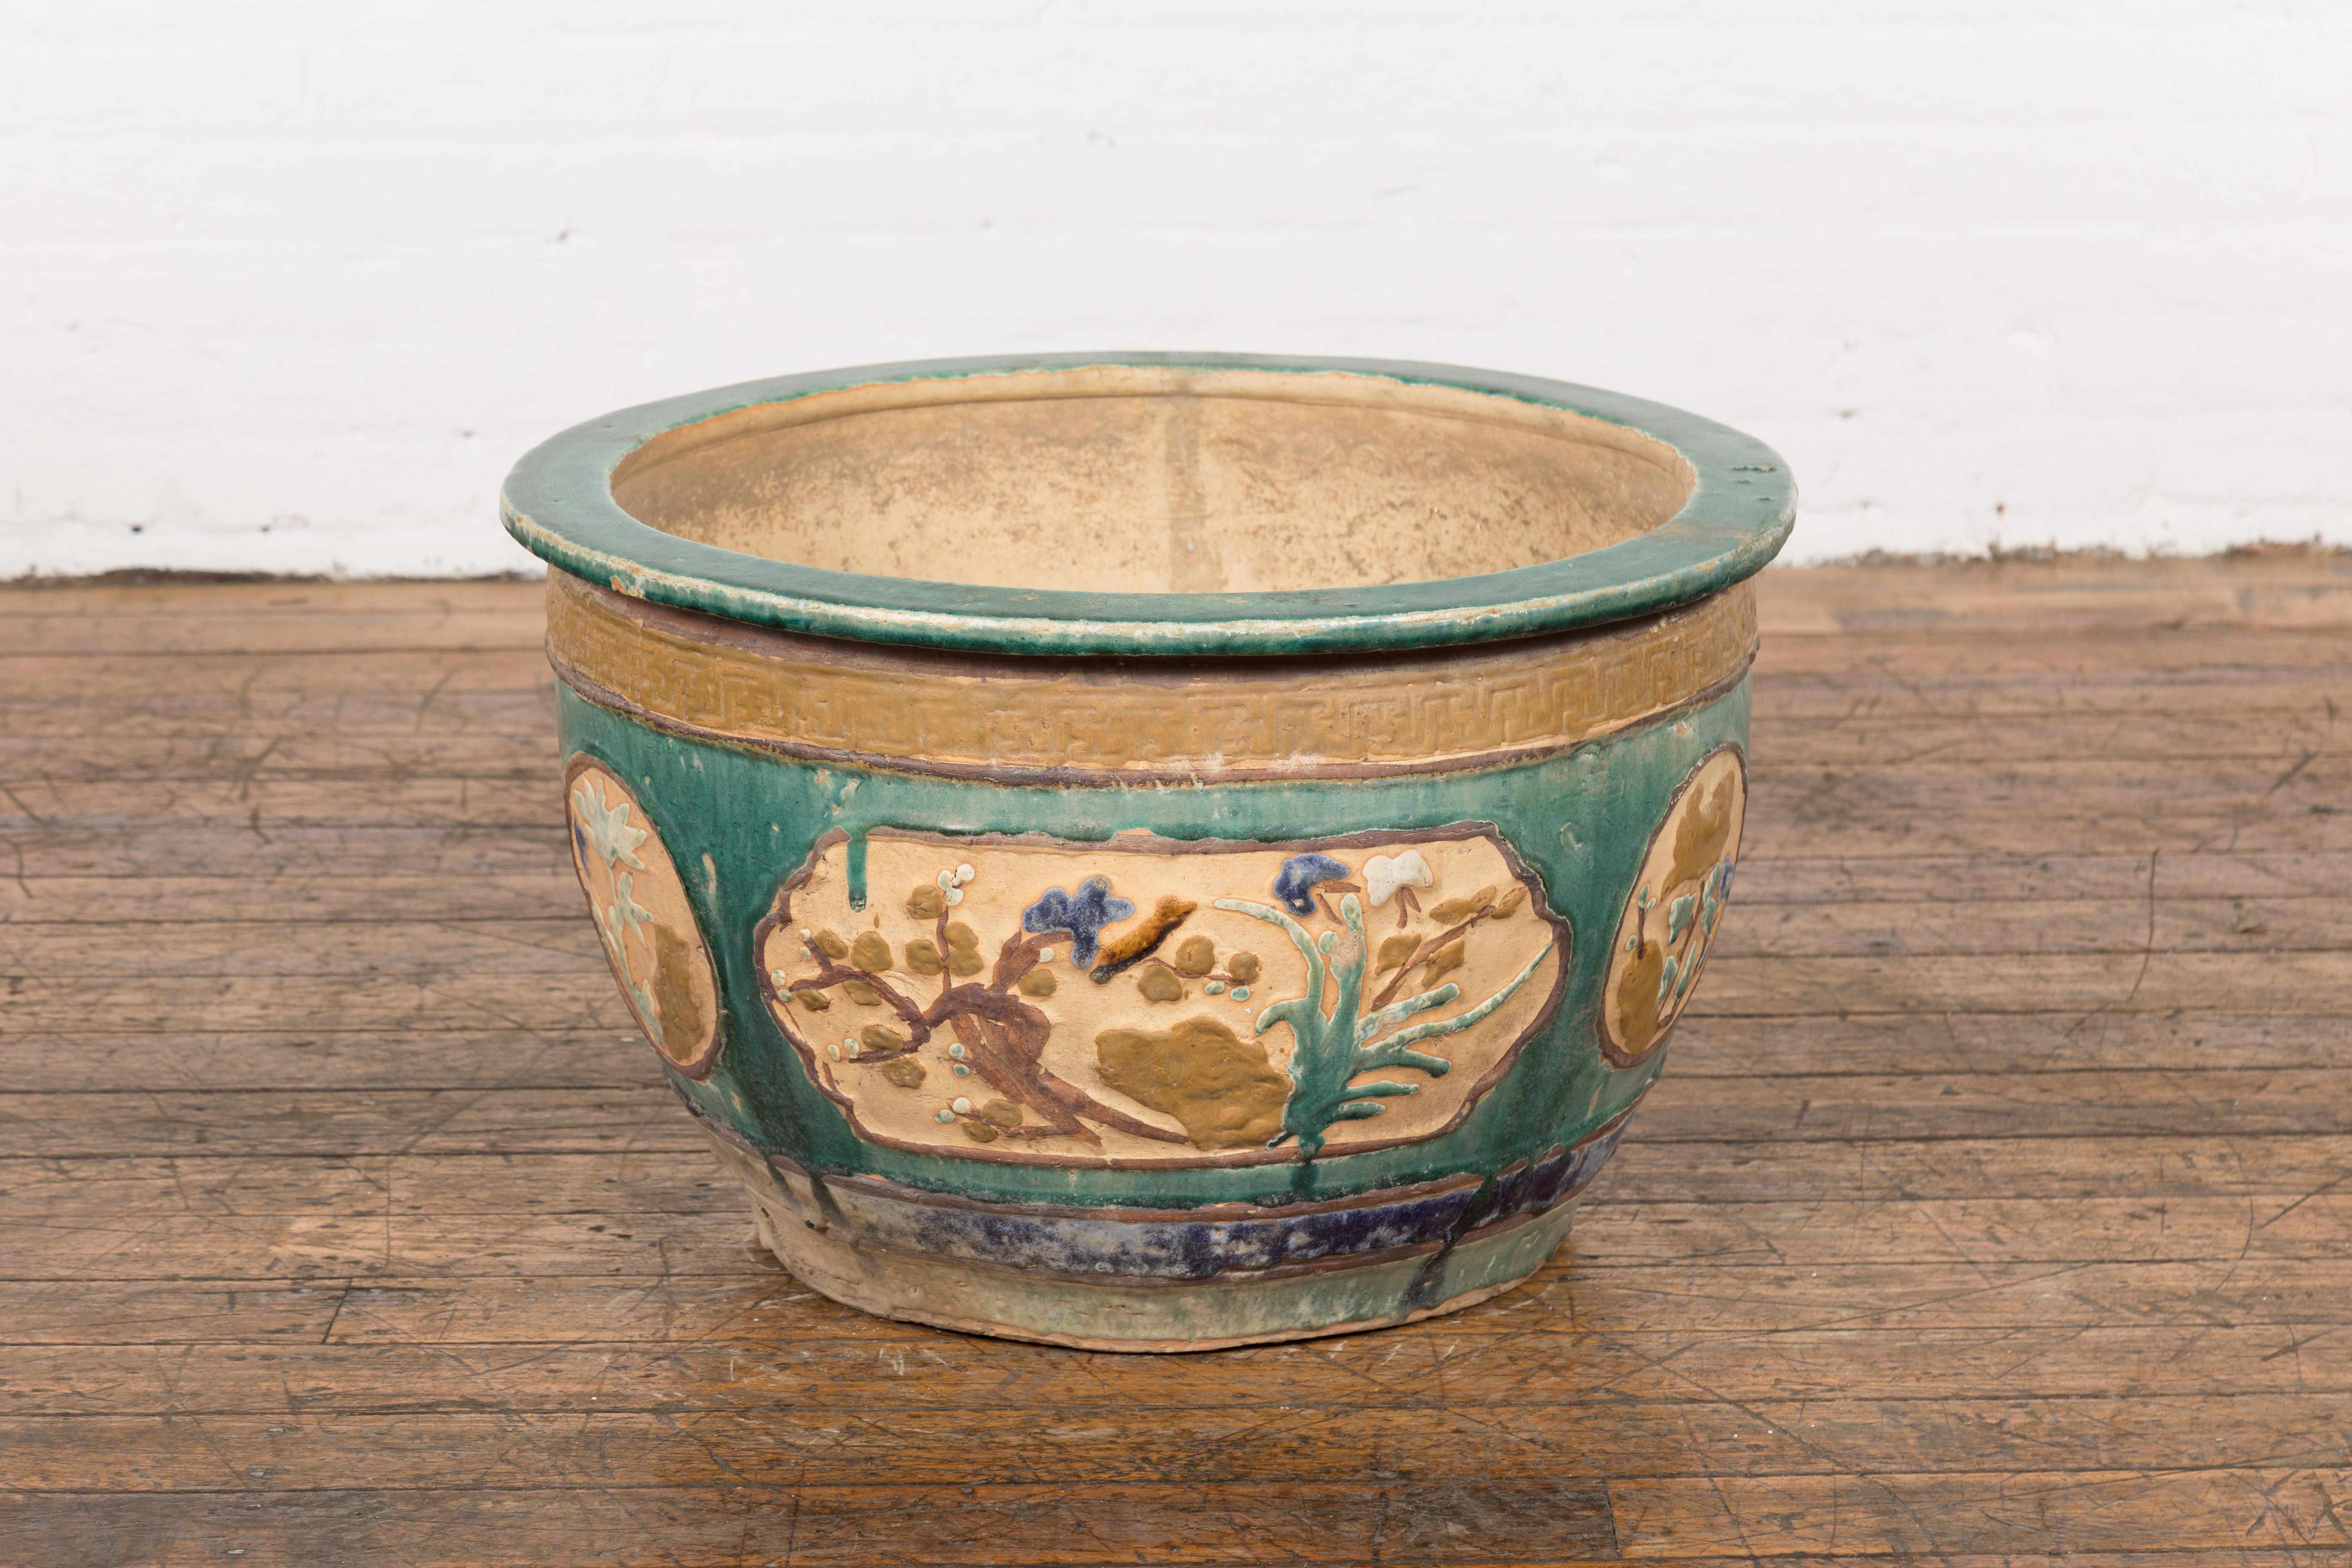 An antique 19th century Annamese green, blue and ocher planter from Vietnam with trees ], foliage, flowers and bird motifs as well as distressed patina. Handcrafted in Vietnam during the 19th century, this planter features a circular silhouette